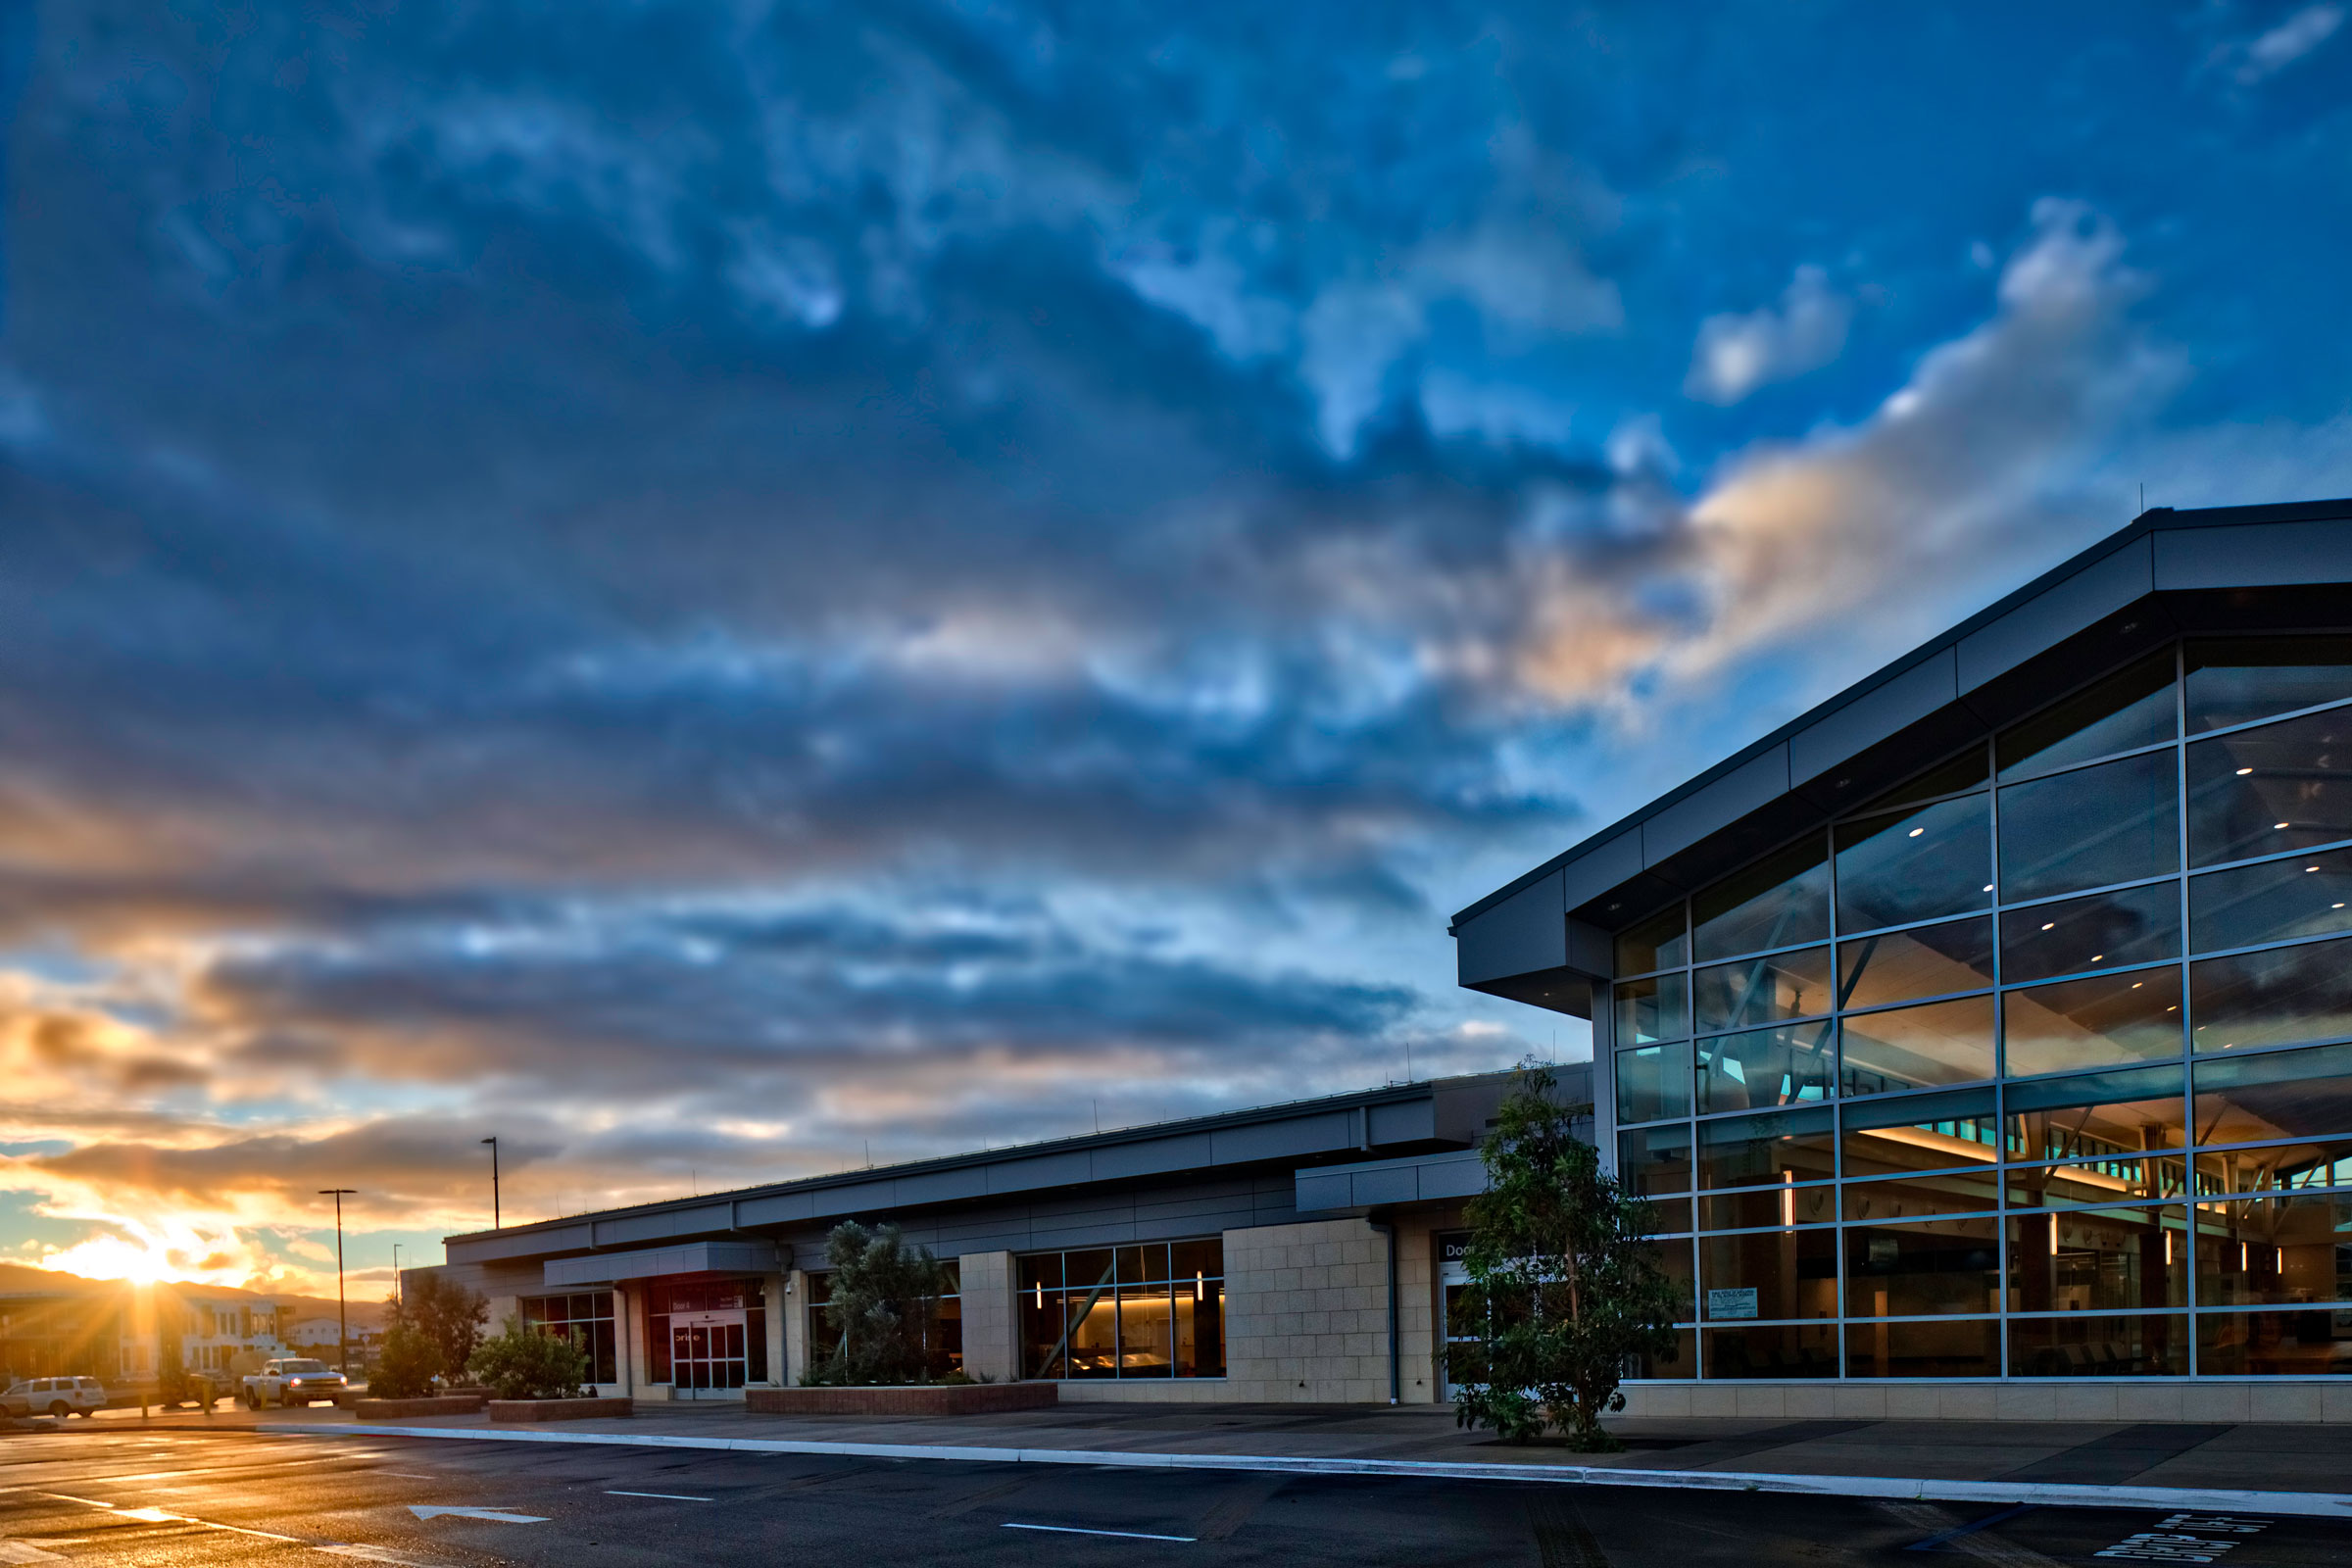 Curbside view of the SBP airport terminal at sunset